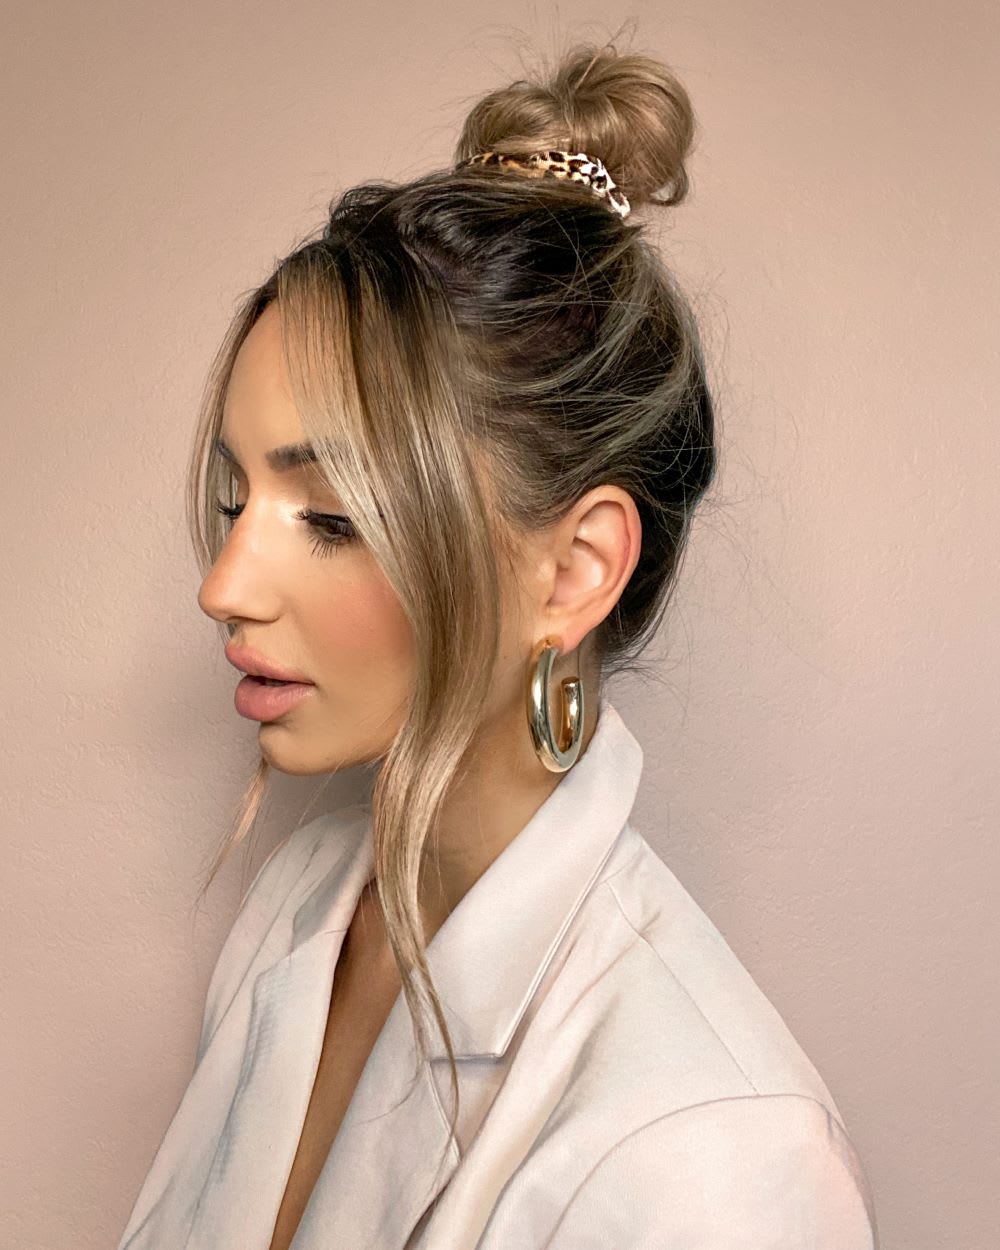 How to Wear It: 3 Chic Scrunchie Hairstyles - Lulus.com Fashion Blog